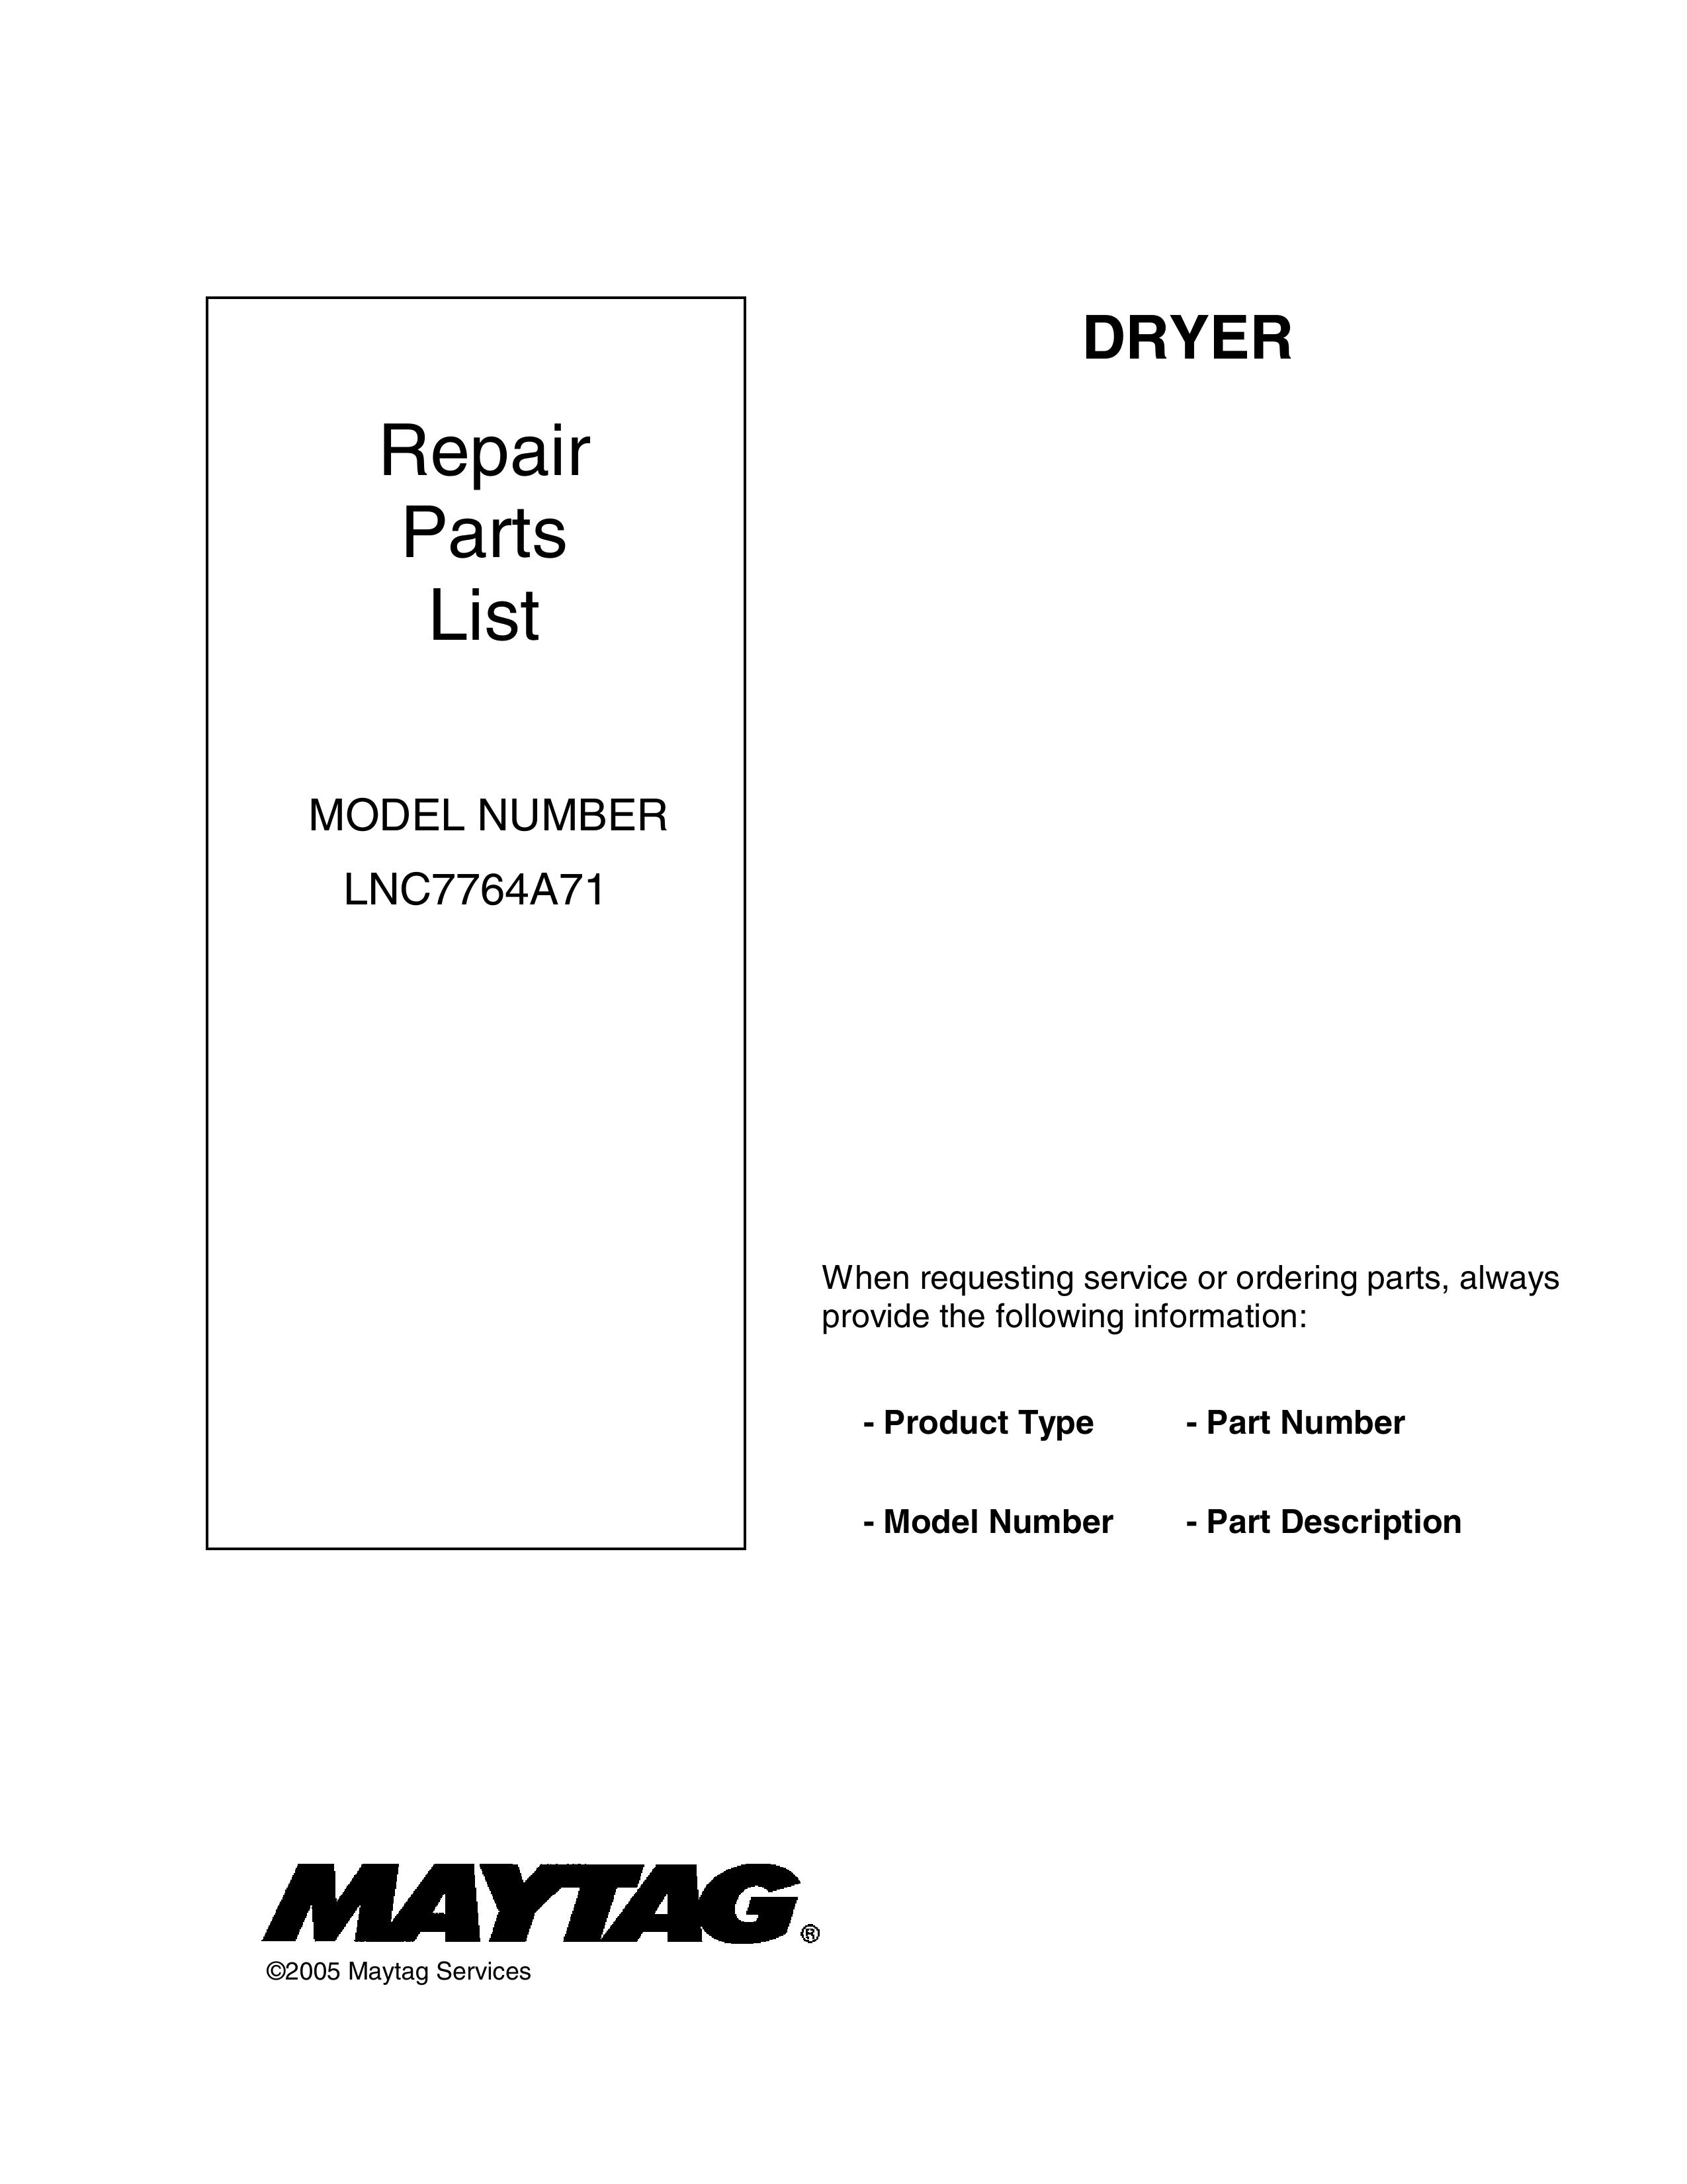 Maytag LNC7764A71 Clothes Dryer User Manual